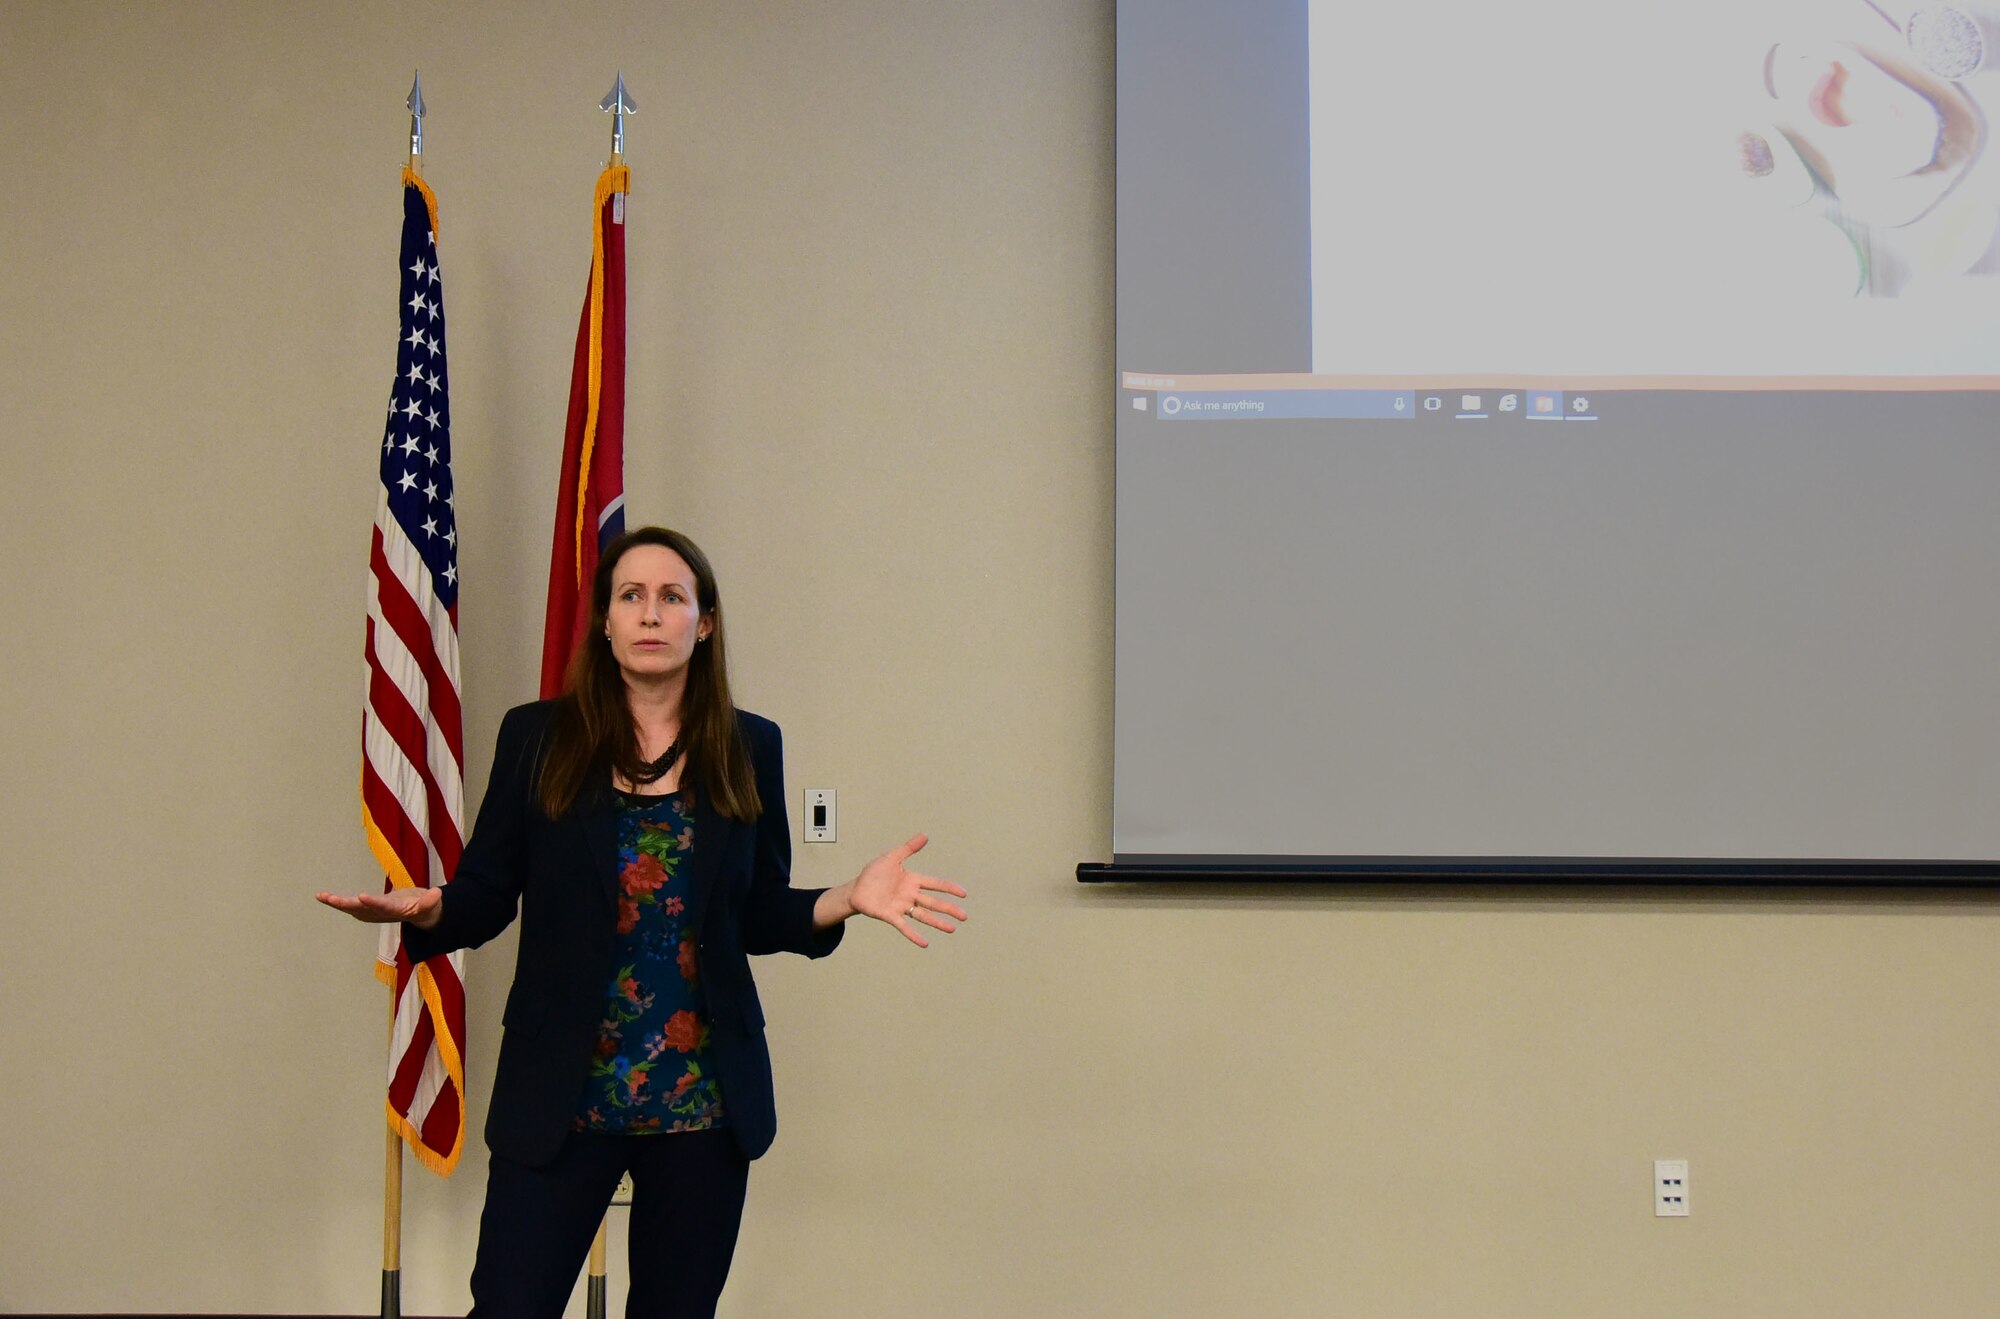 Laura Schmutzer, a registered dietician, gives a presentation to members of the 118th Wing on a healthy diet on May 5, 2018 at Berry Field Air National Guard Base, Nashville, Tennessee. Schmutzer’s main goal of the presentation was to encourage Airmen to set healthy goals and habits to prevent chronic diseases. (U.S. Air National Guard photo by Senior Airman Anthony Agosti)